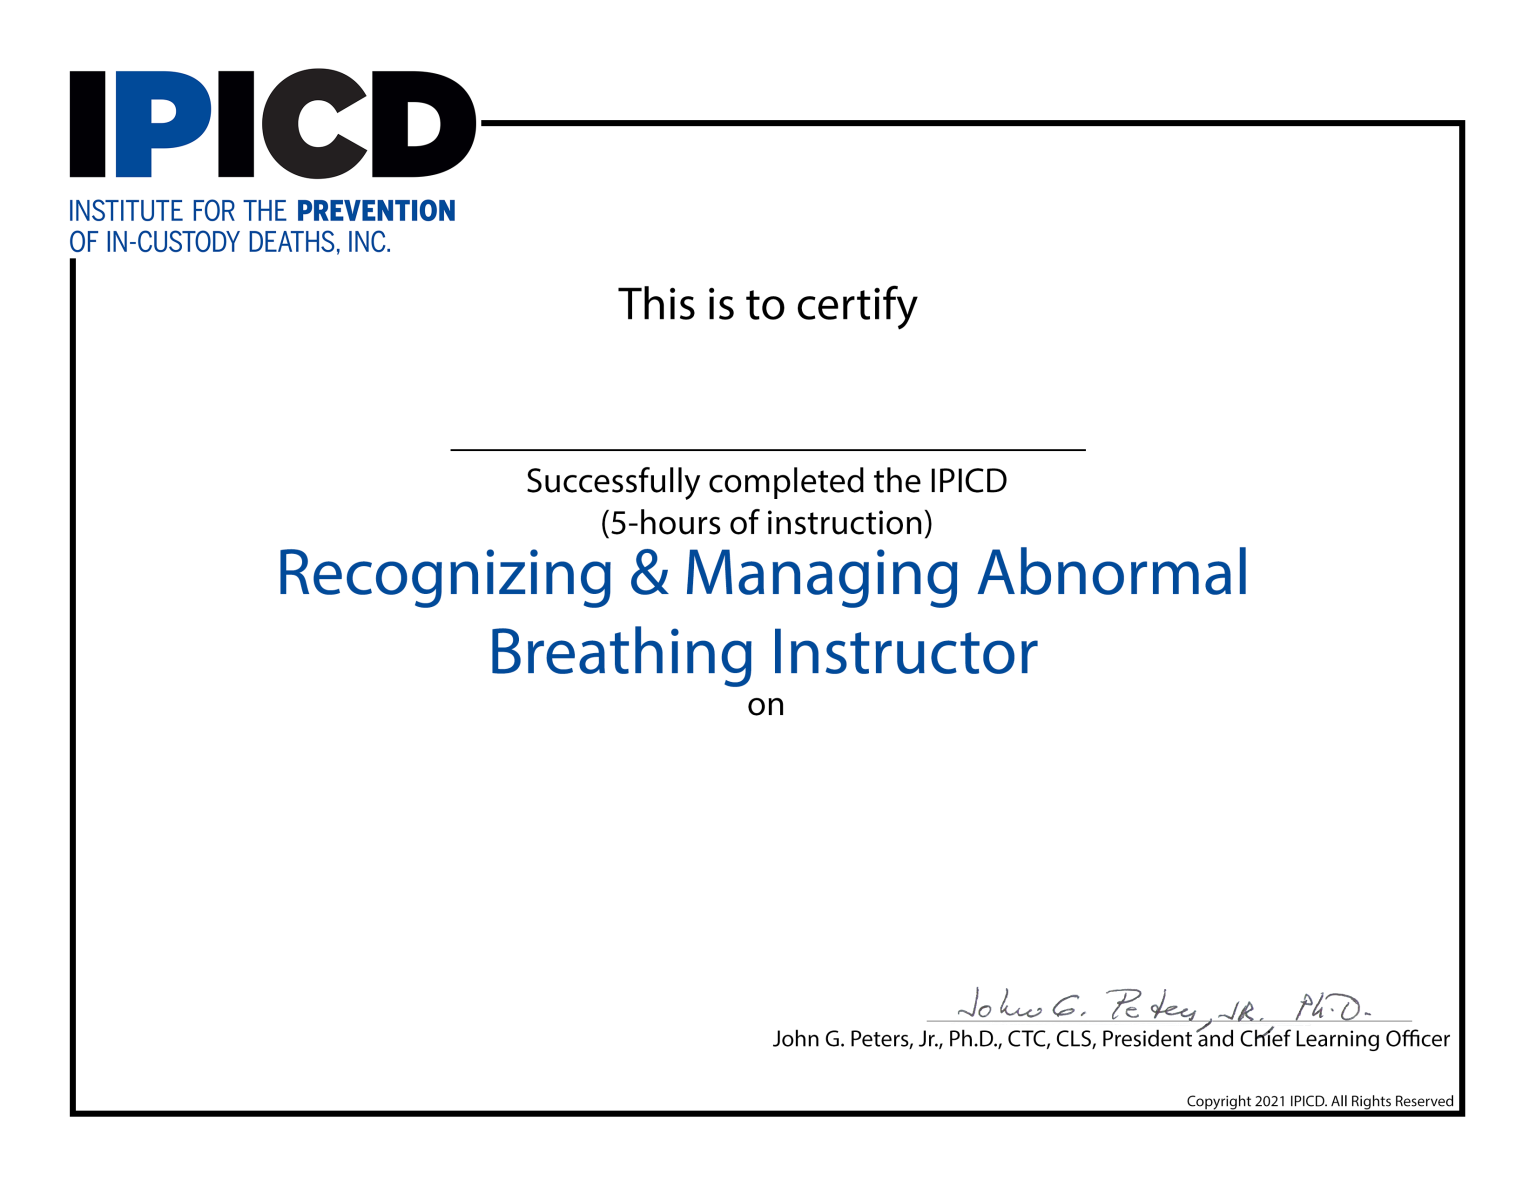 IPICD Recognizing and Managing Abnormal Breathing Instructor